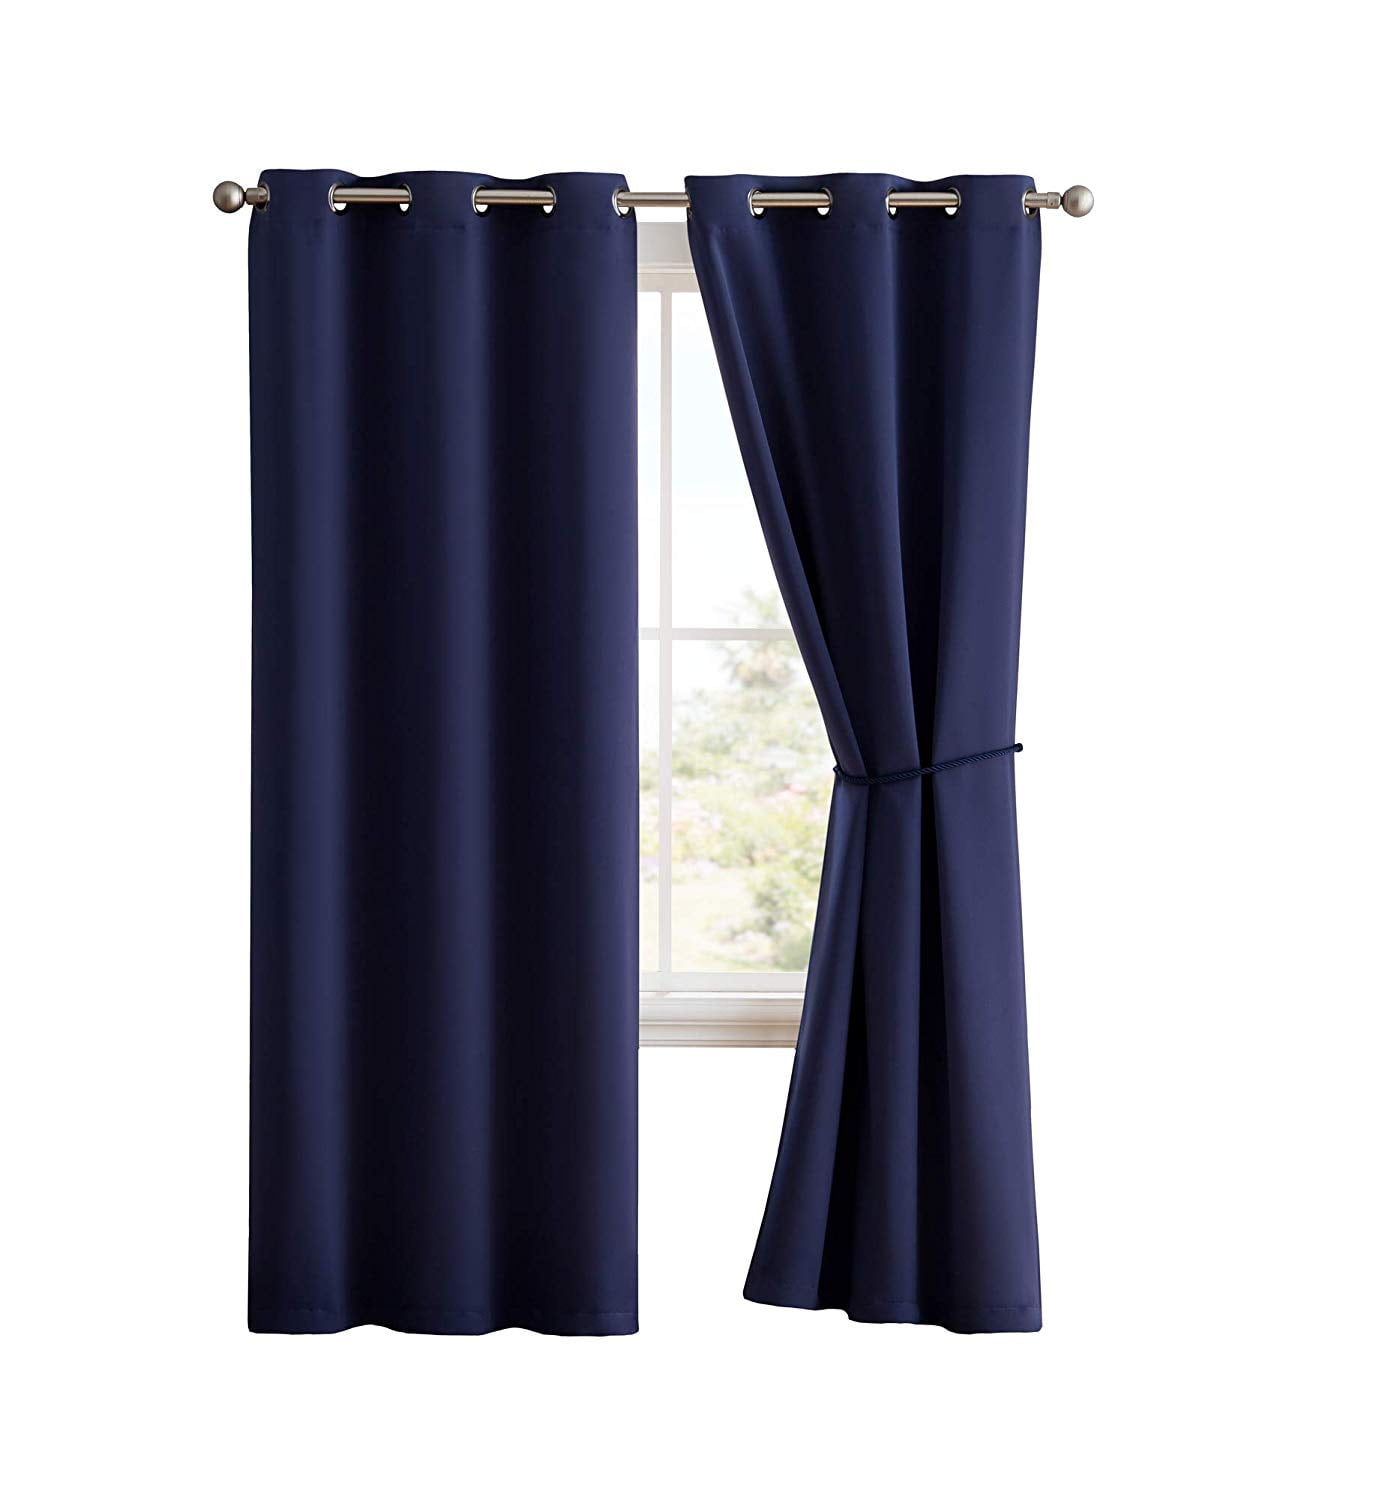 1 SINGLE PANEL GROMMET INSULATE 99% BLACKOUT WINDOW LINED CURTAIN SOLID GOLD 